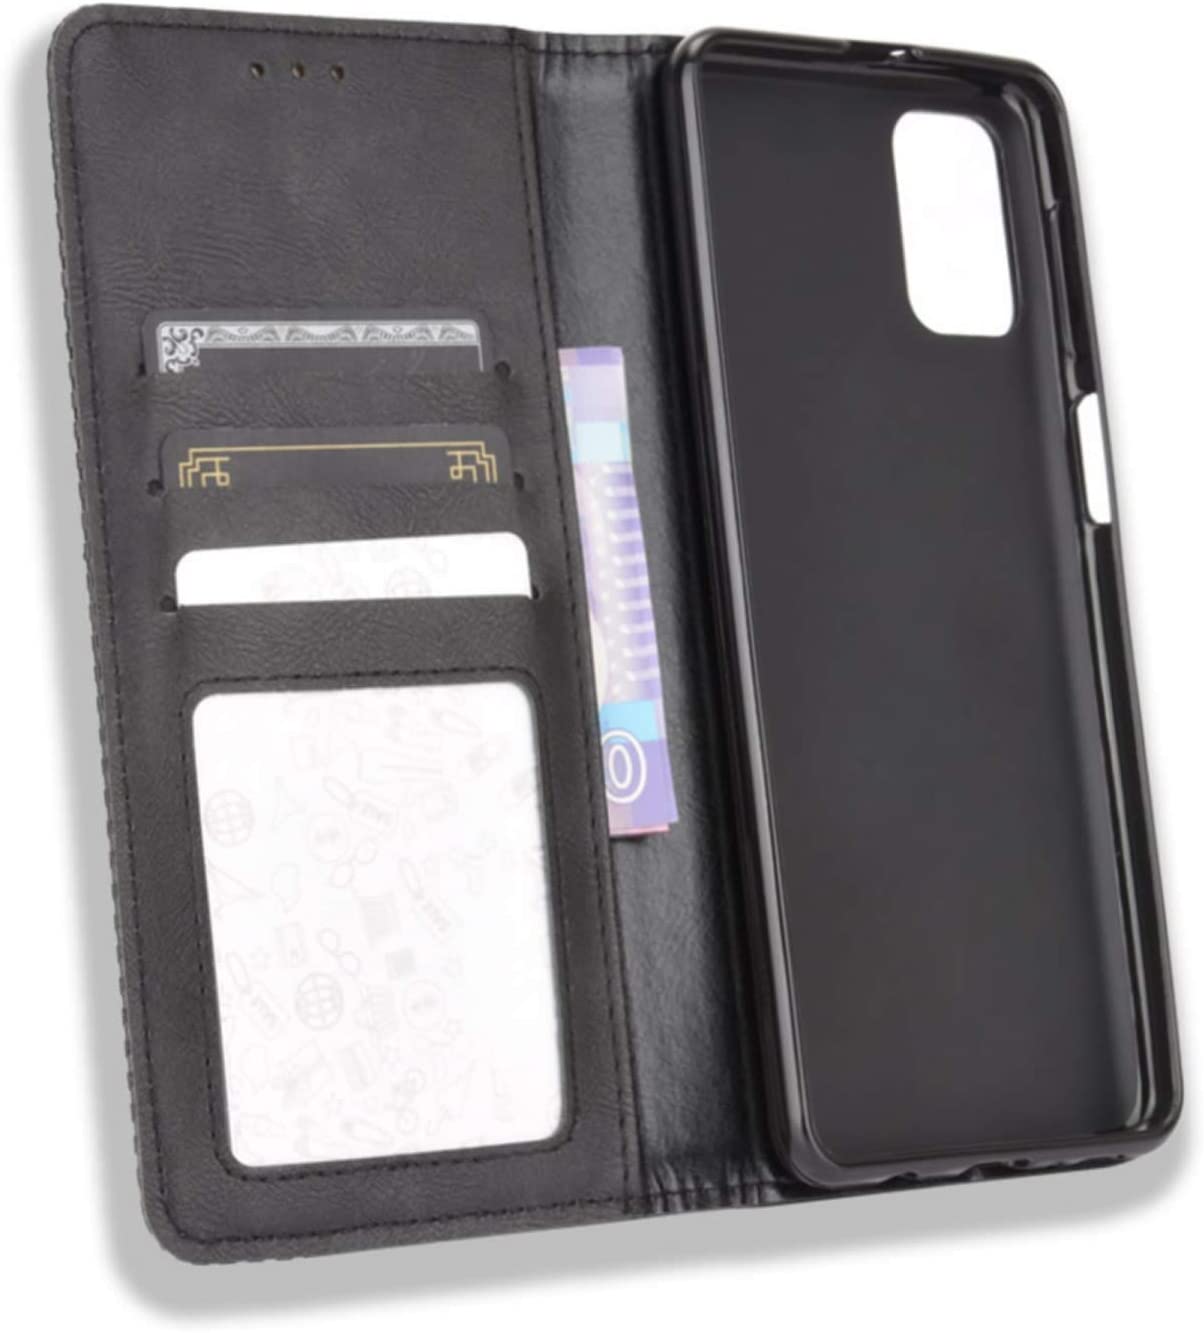 Samsung Galaxy M51 full body protection Leather Wallet flip case cover by Excelsior